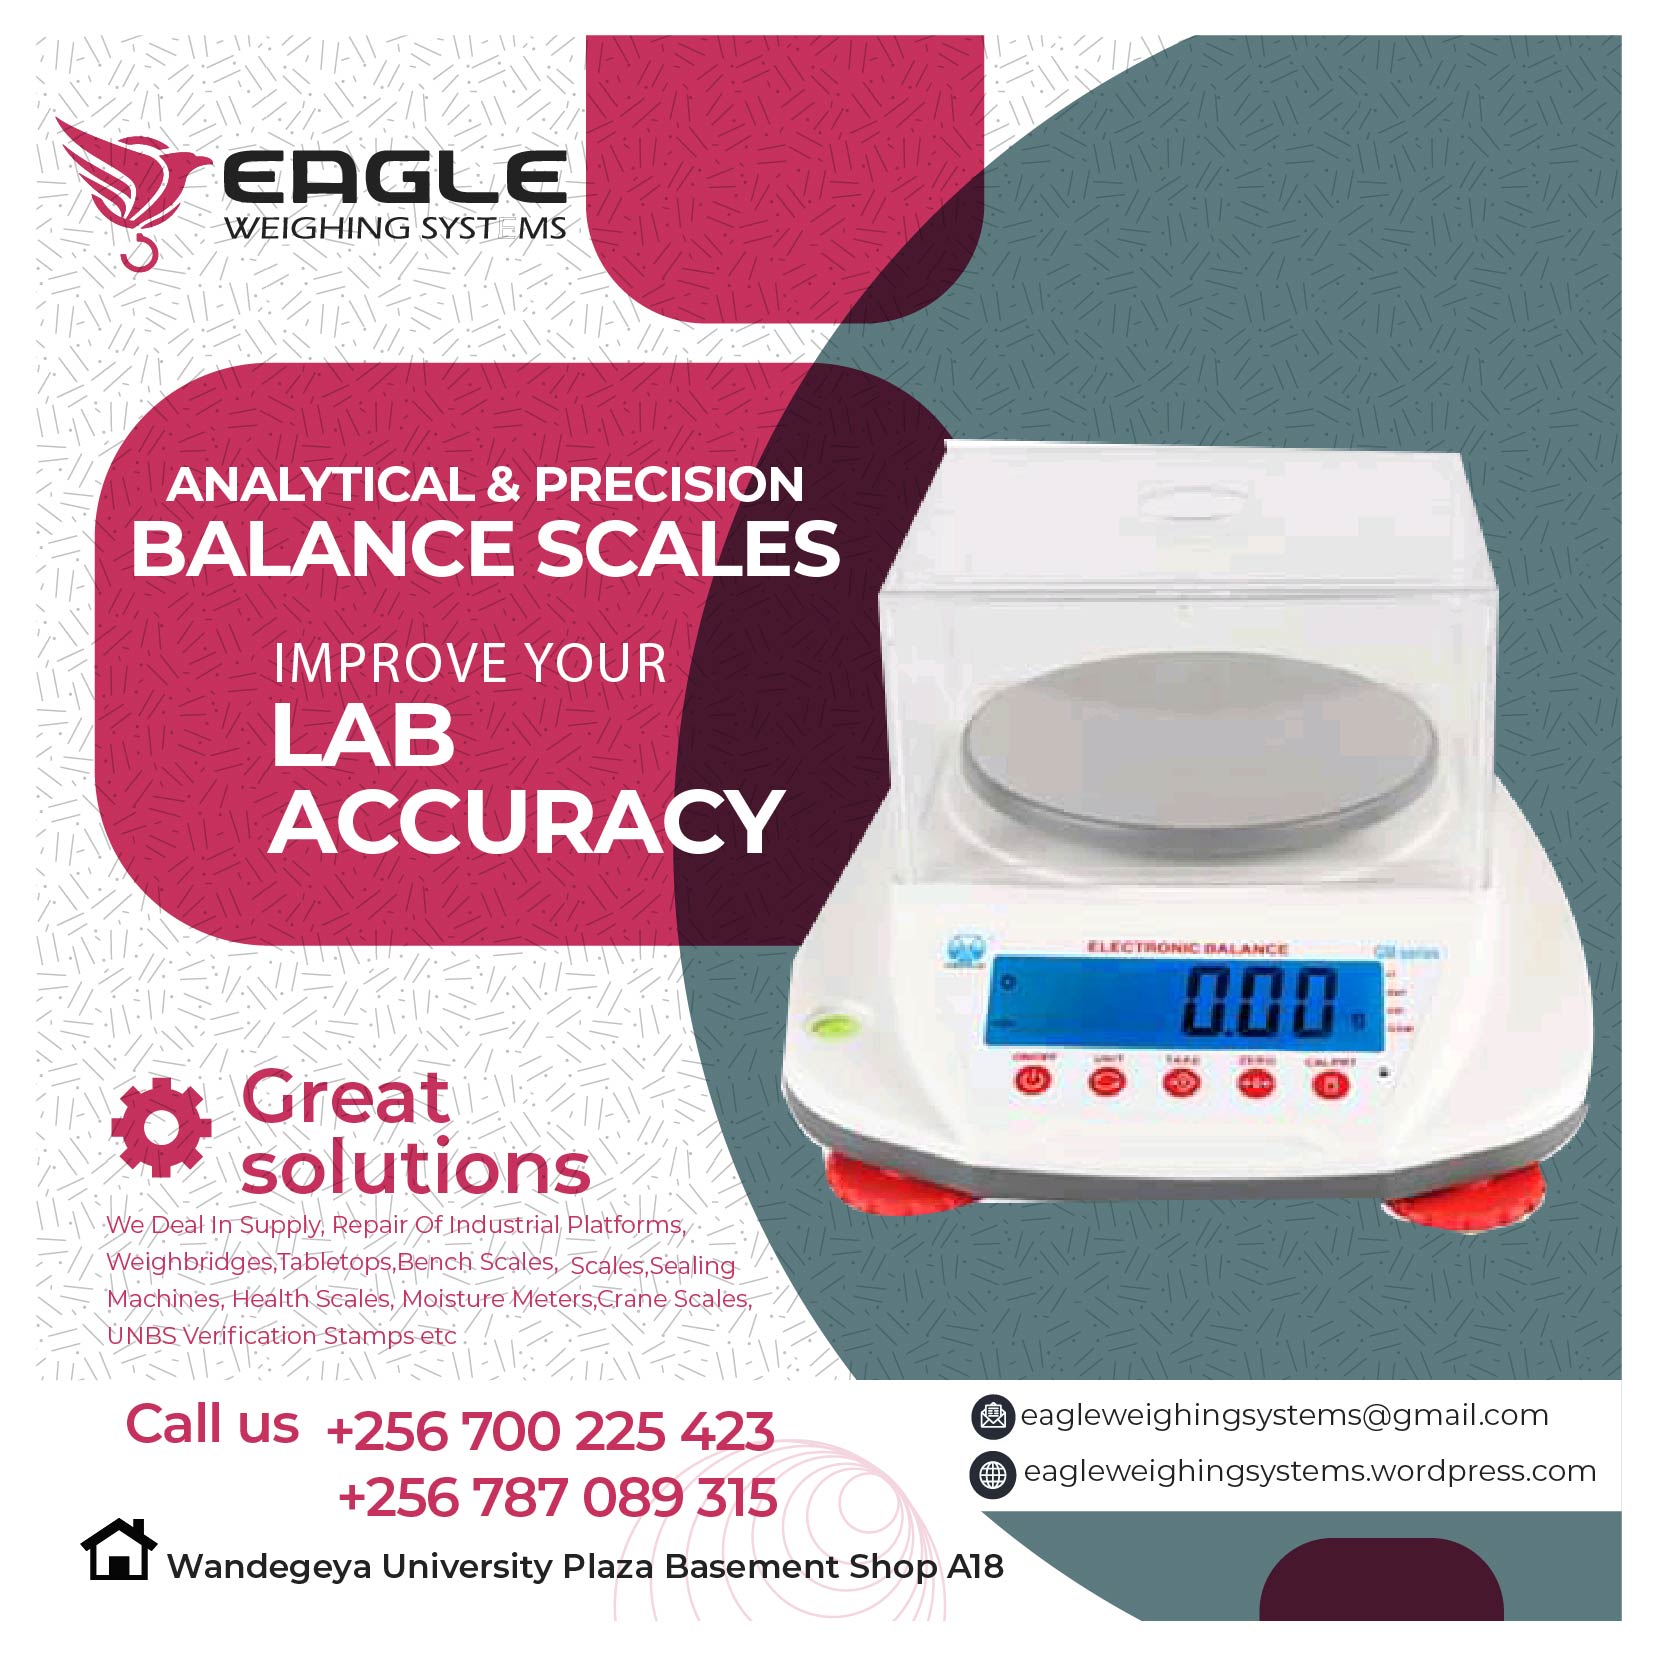 Table top electronic laboratory balance scales, Kampala Central Division, Central, Uganda